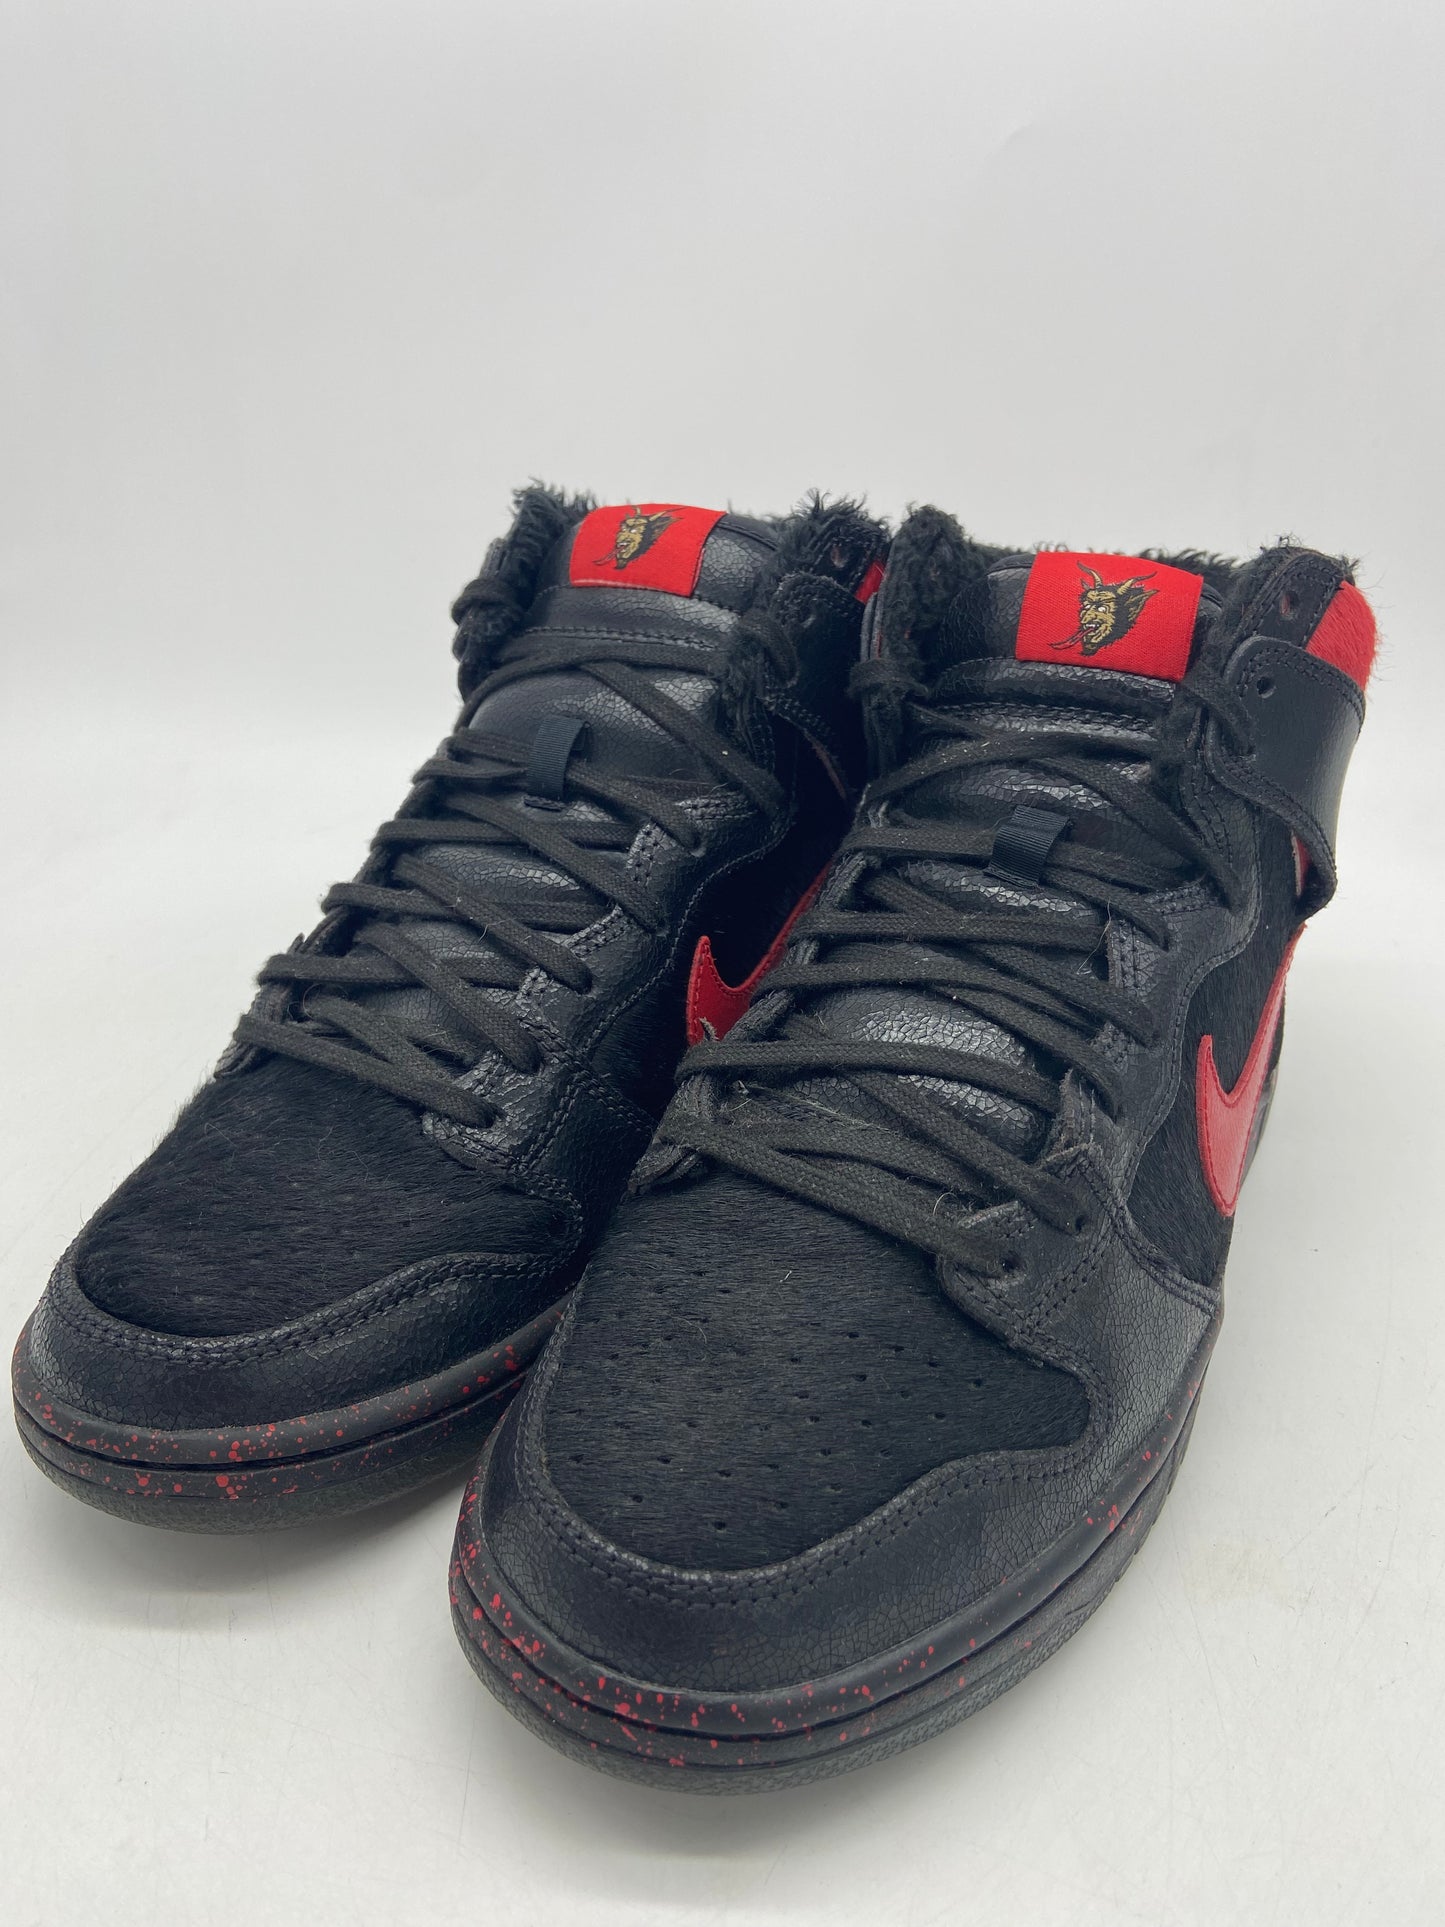 Load image into Gallery viewer, Preowned 2012 Nike SB Dunk High Krampus Sz 9M/10.5W (554673-006)
